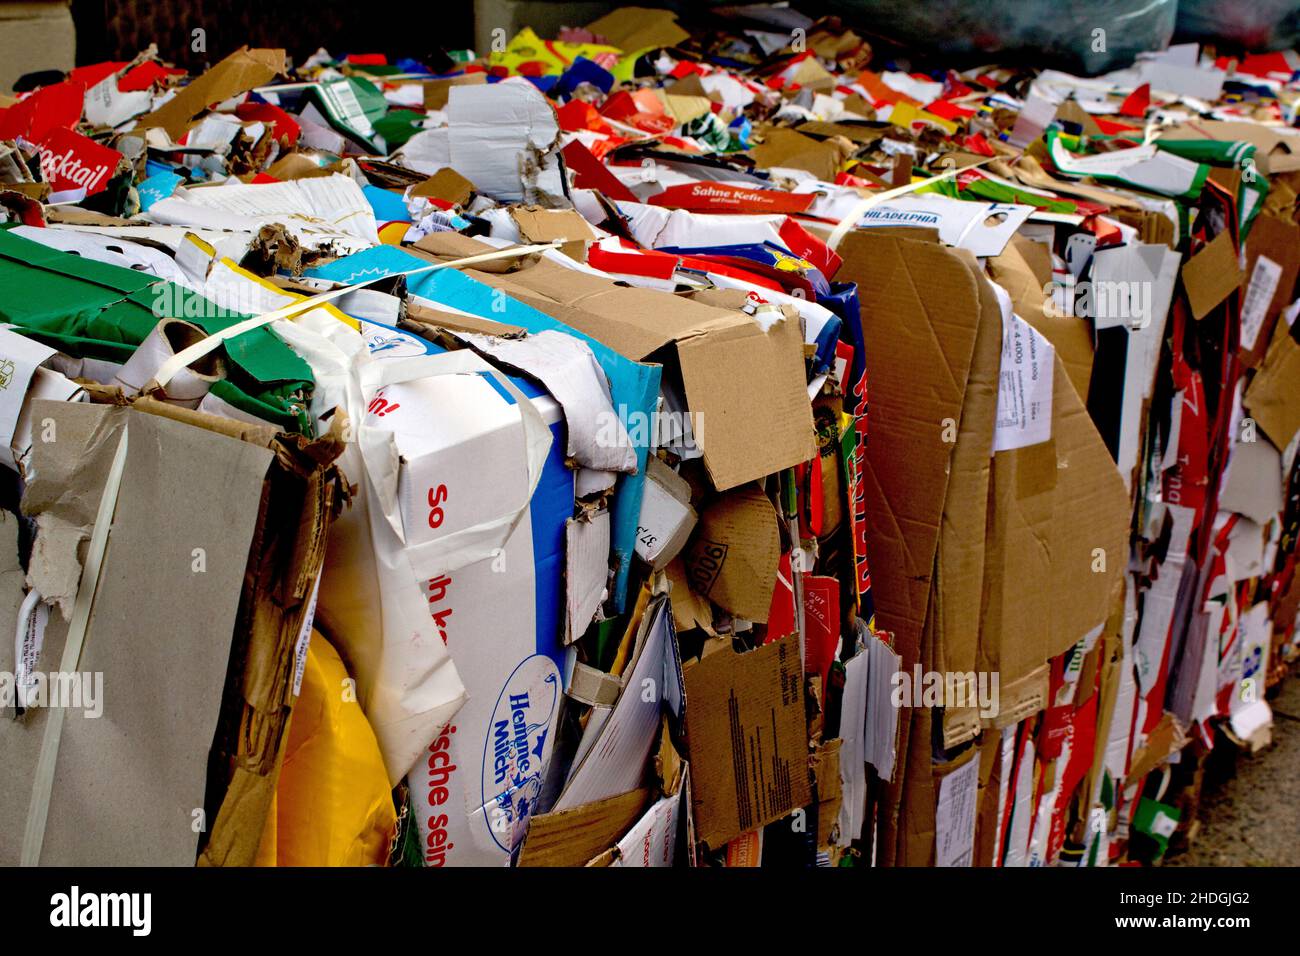 cardboard, recycled paper, wholesale, paper recycling, cardboards, recycled papers, recycling, wholesales, recycle Stock Photo